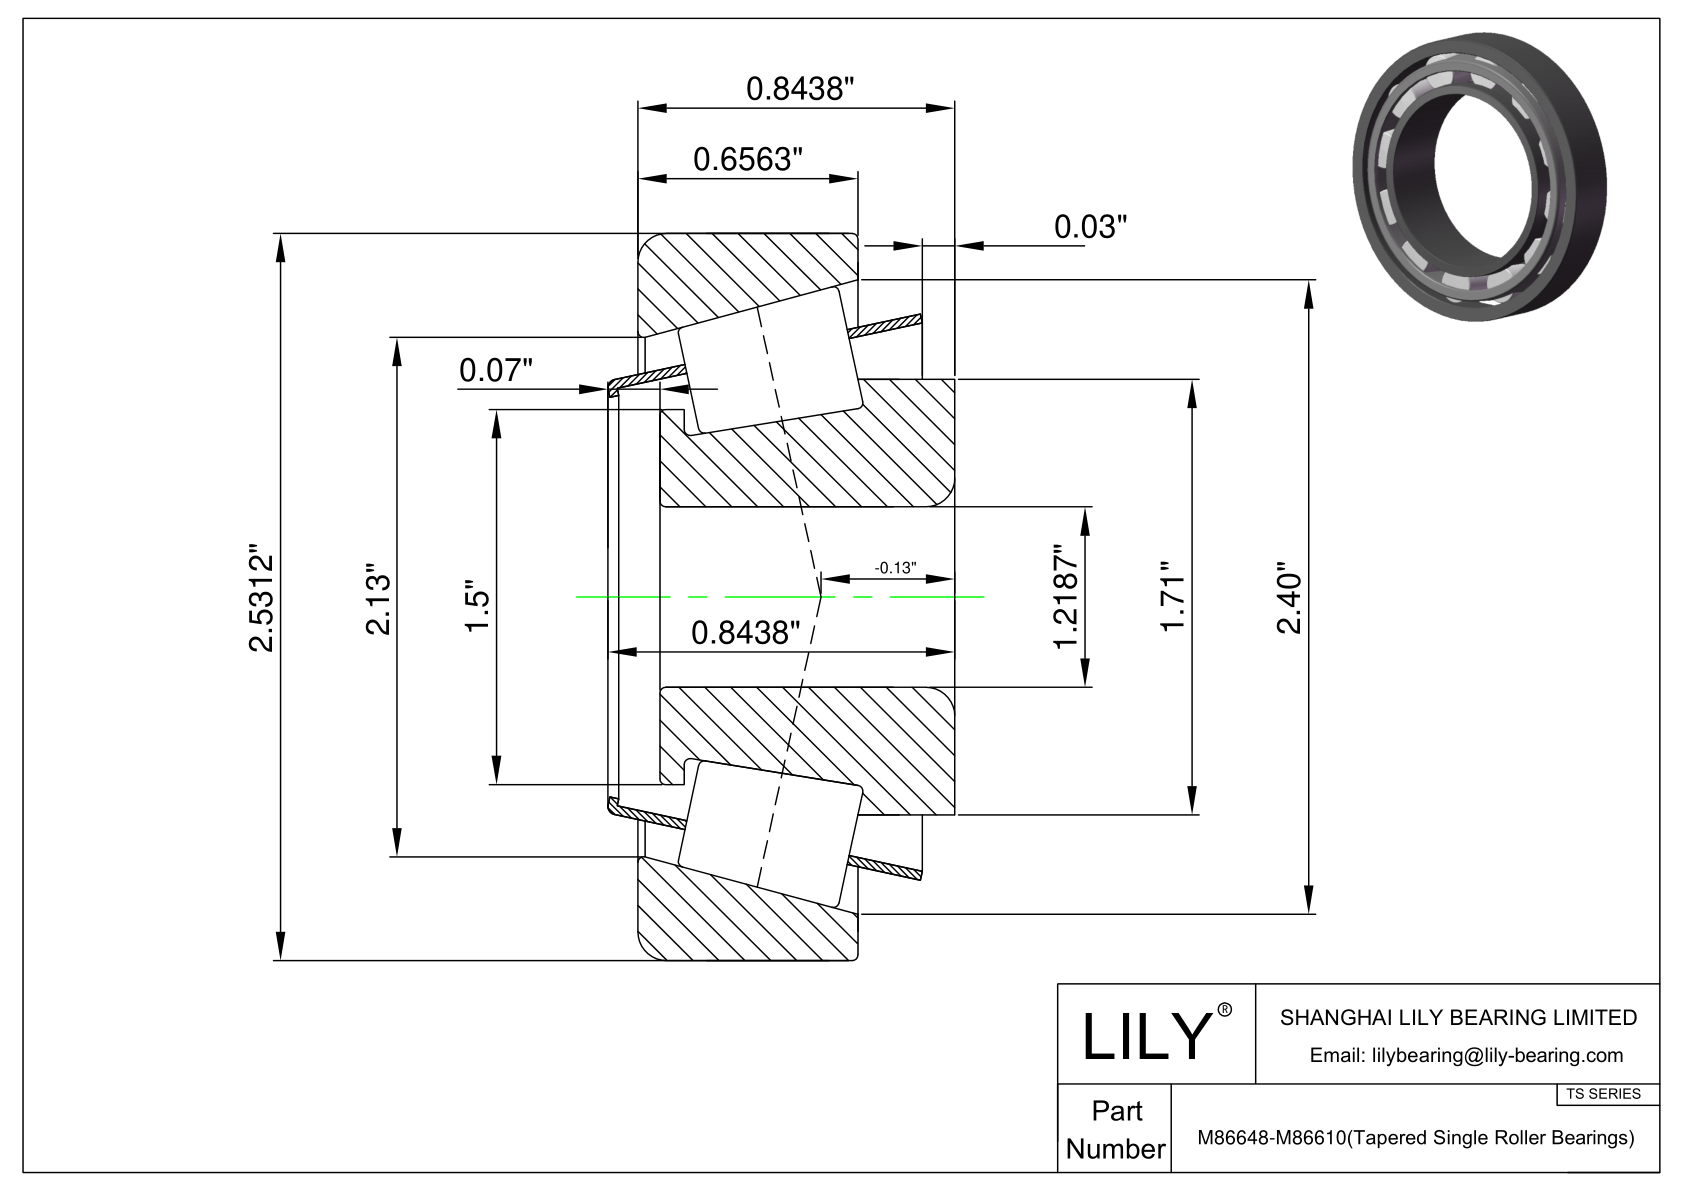 M86648-M86610 TS (Tapered Single Roller Bearings) (Imperial) cad drawing